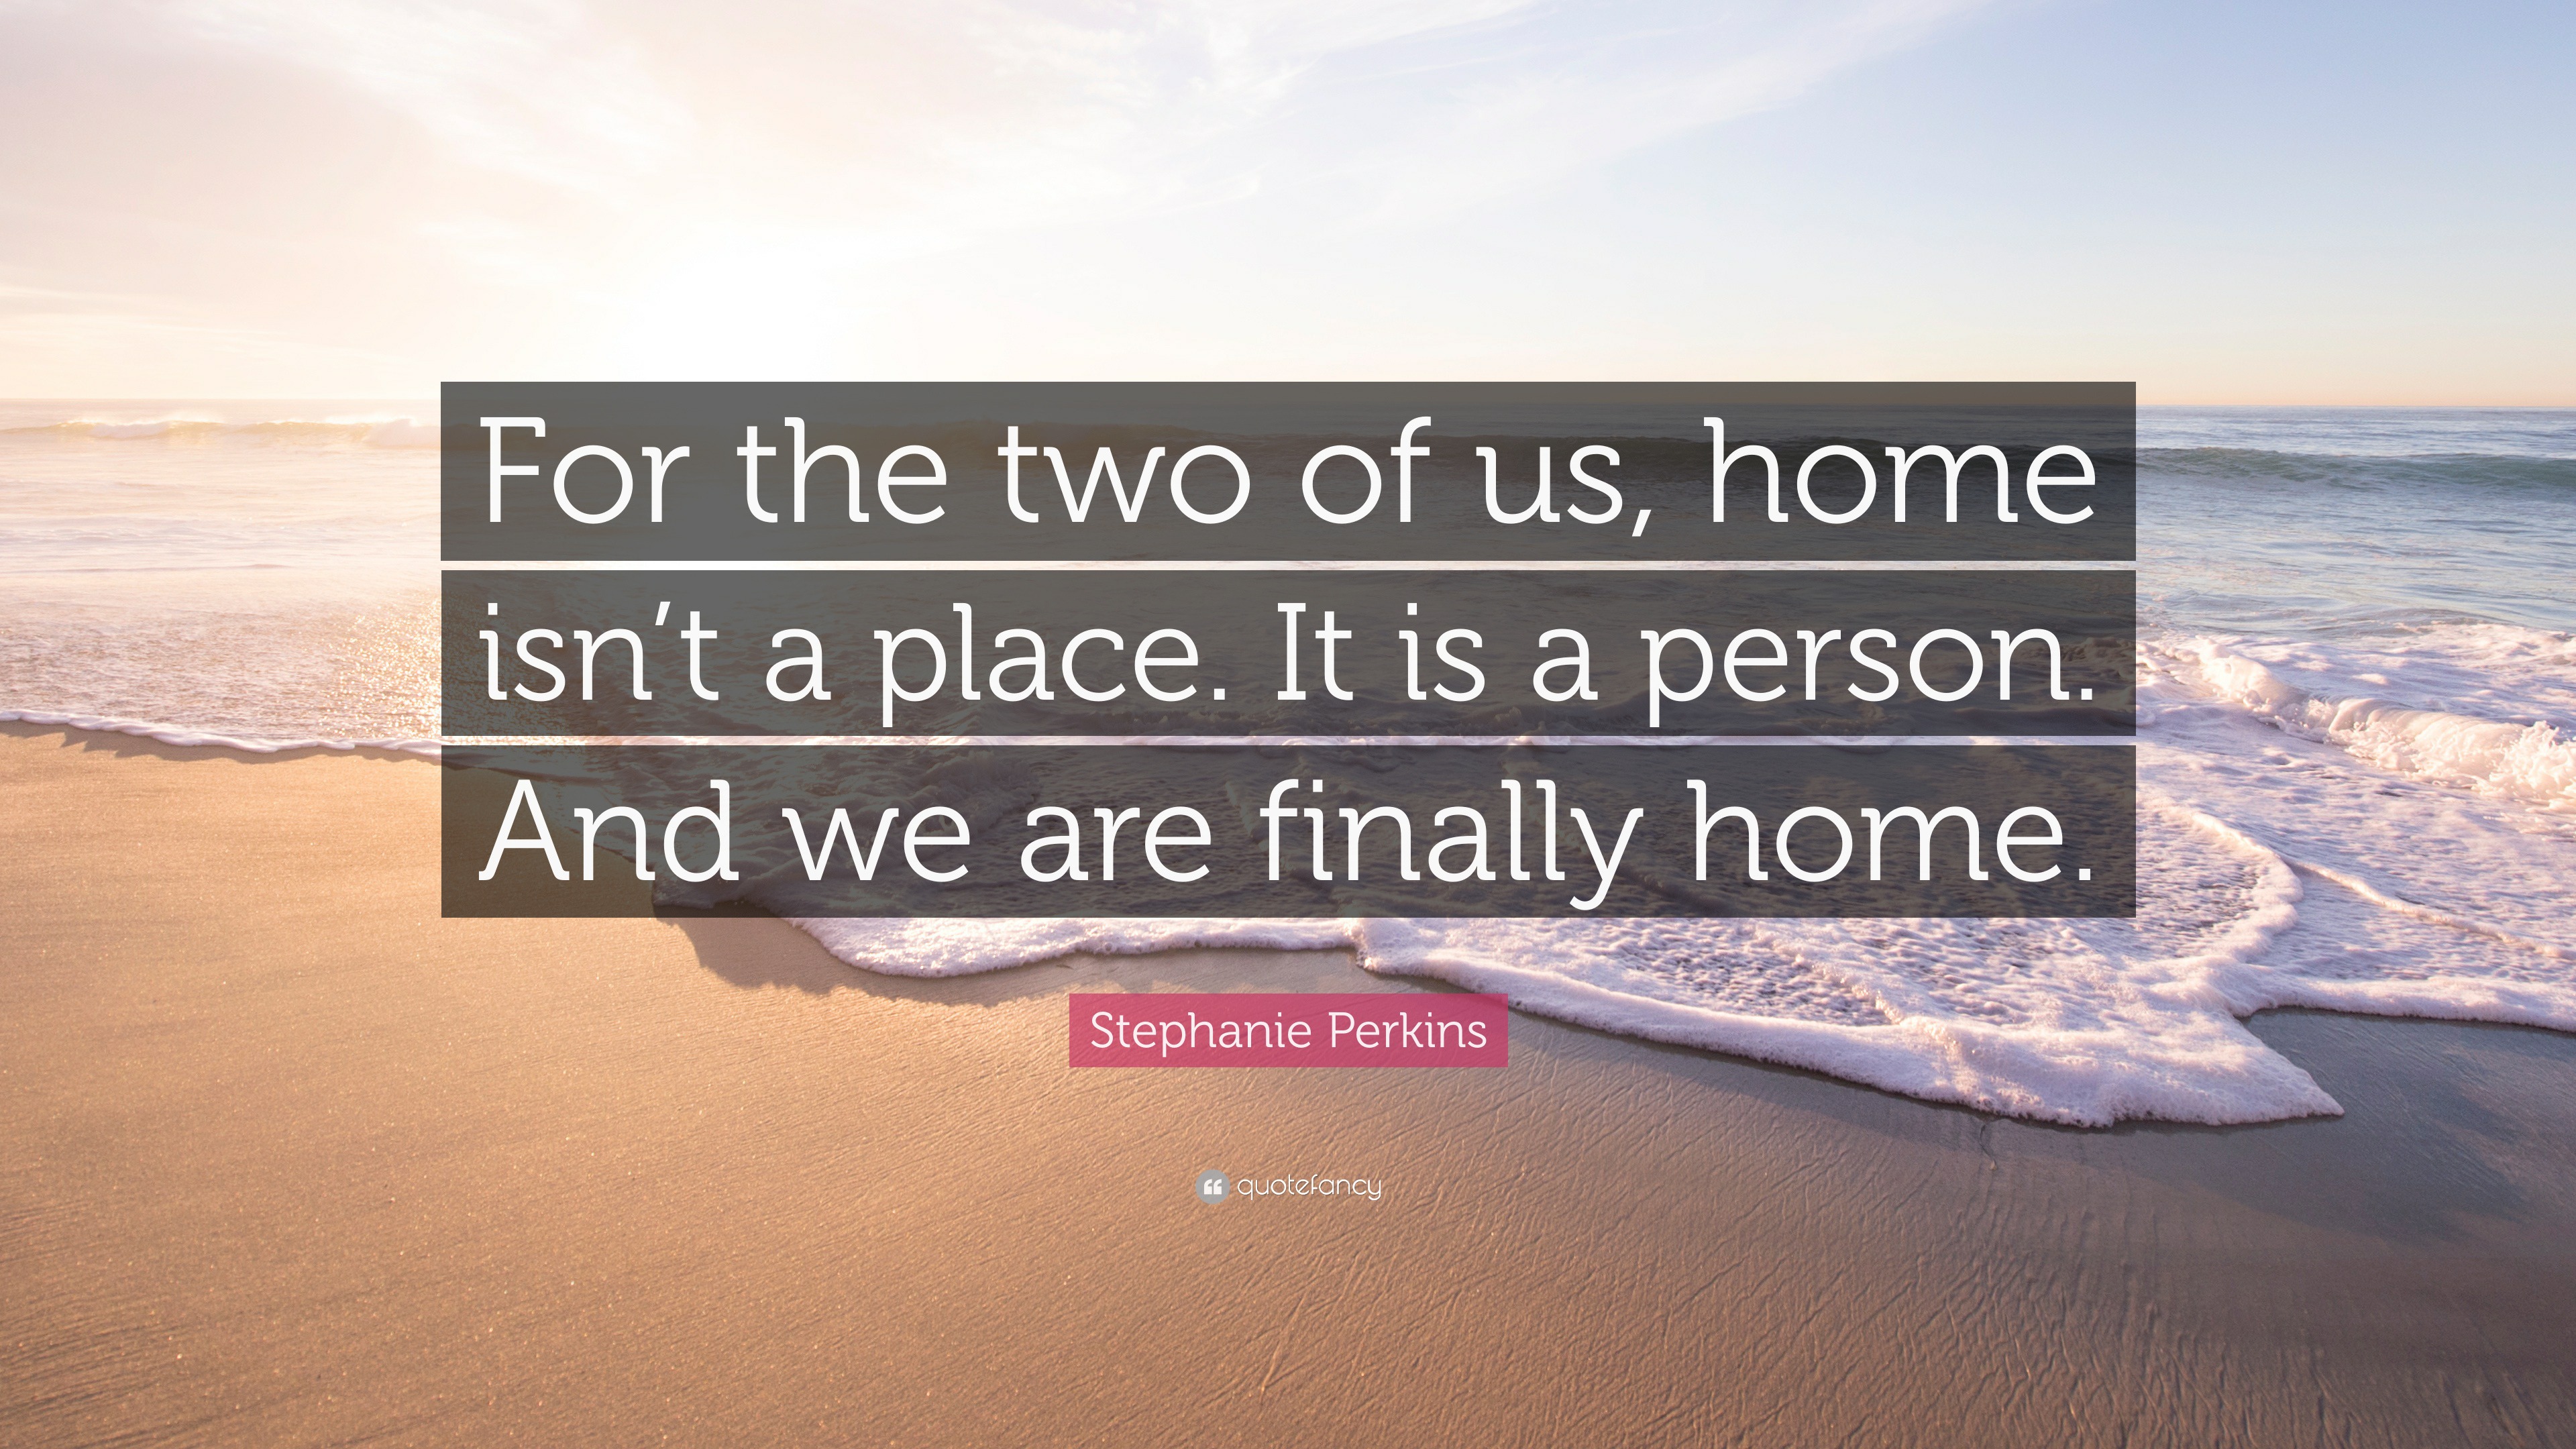 I Love You Quotes - For the two of us, home isn't a place. It